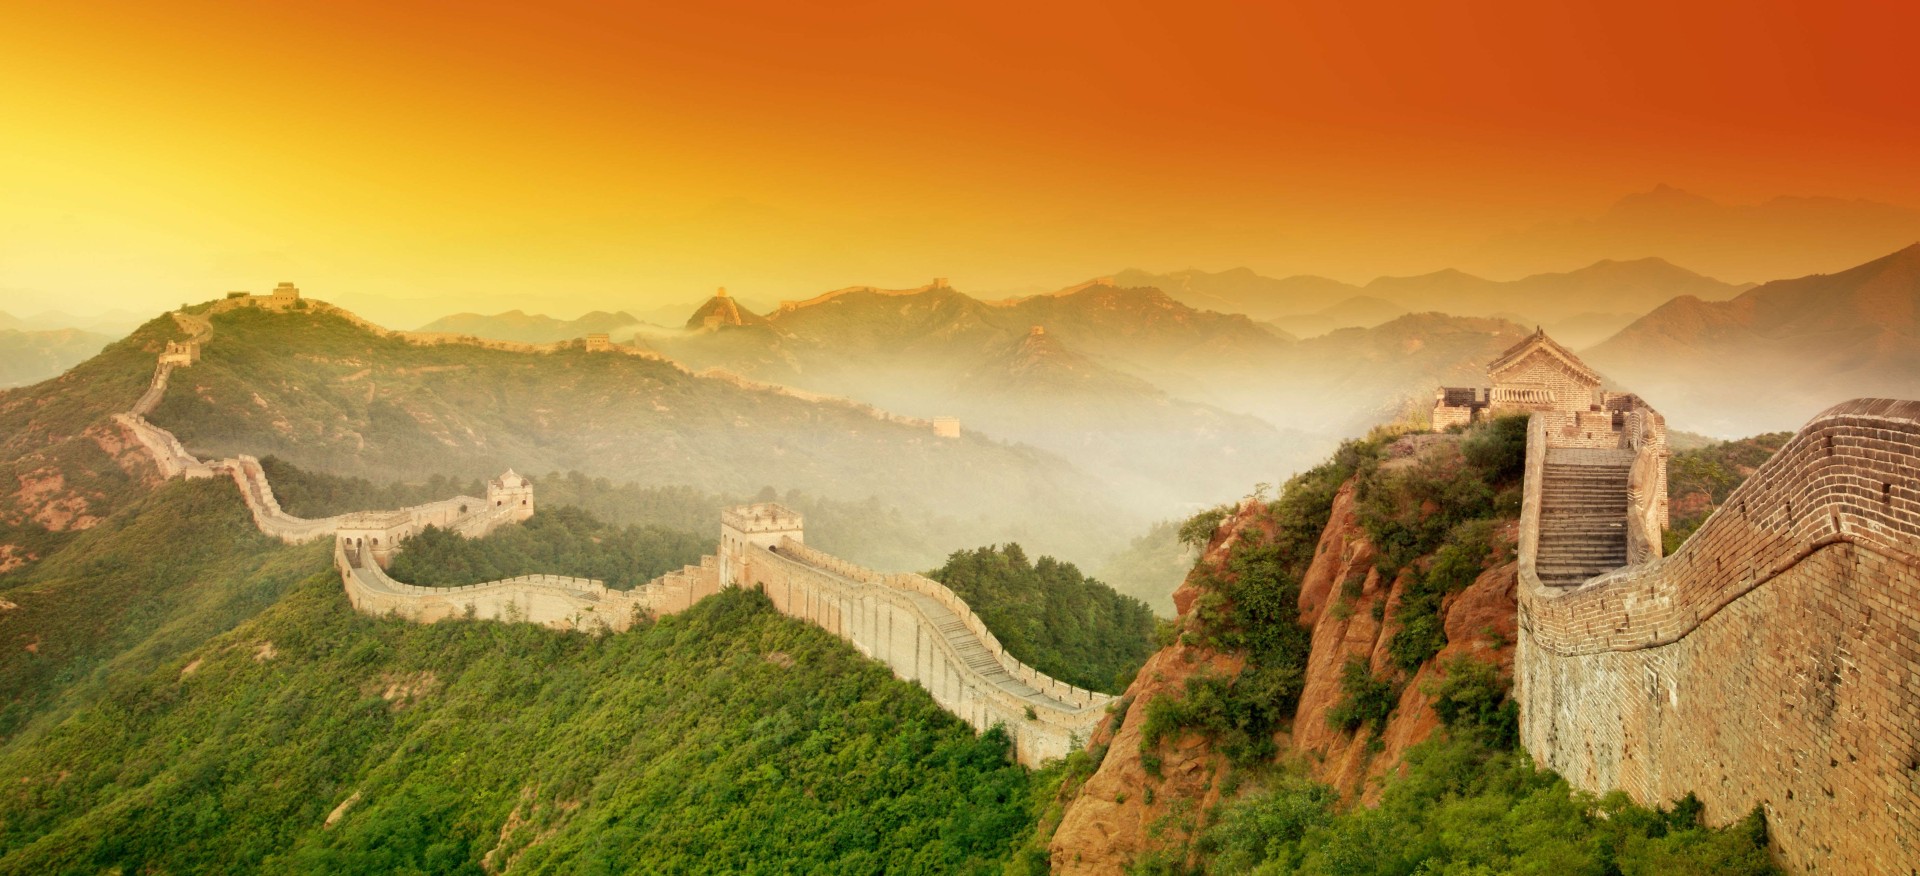 China S Great Wall The Good Bad And Ugly Sides For Tourists South China Morning Post